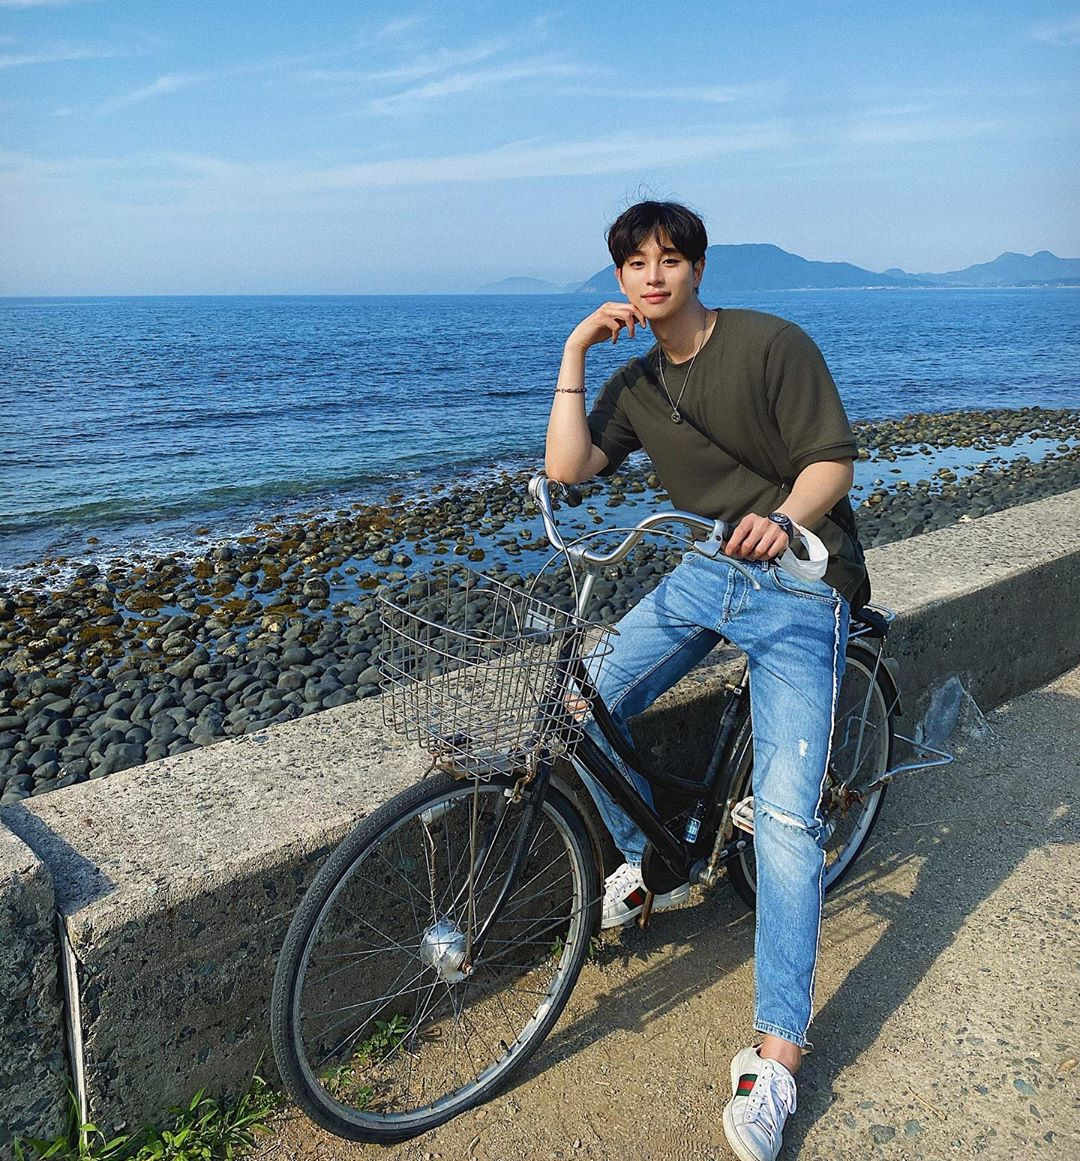 Bicycle pose is one of the best photo poses for men